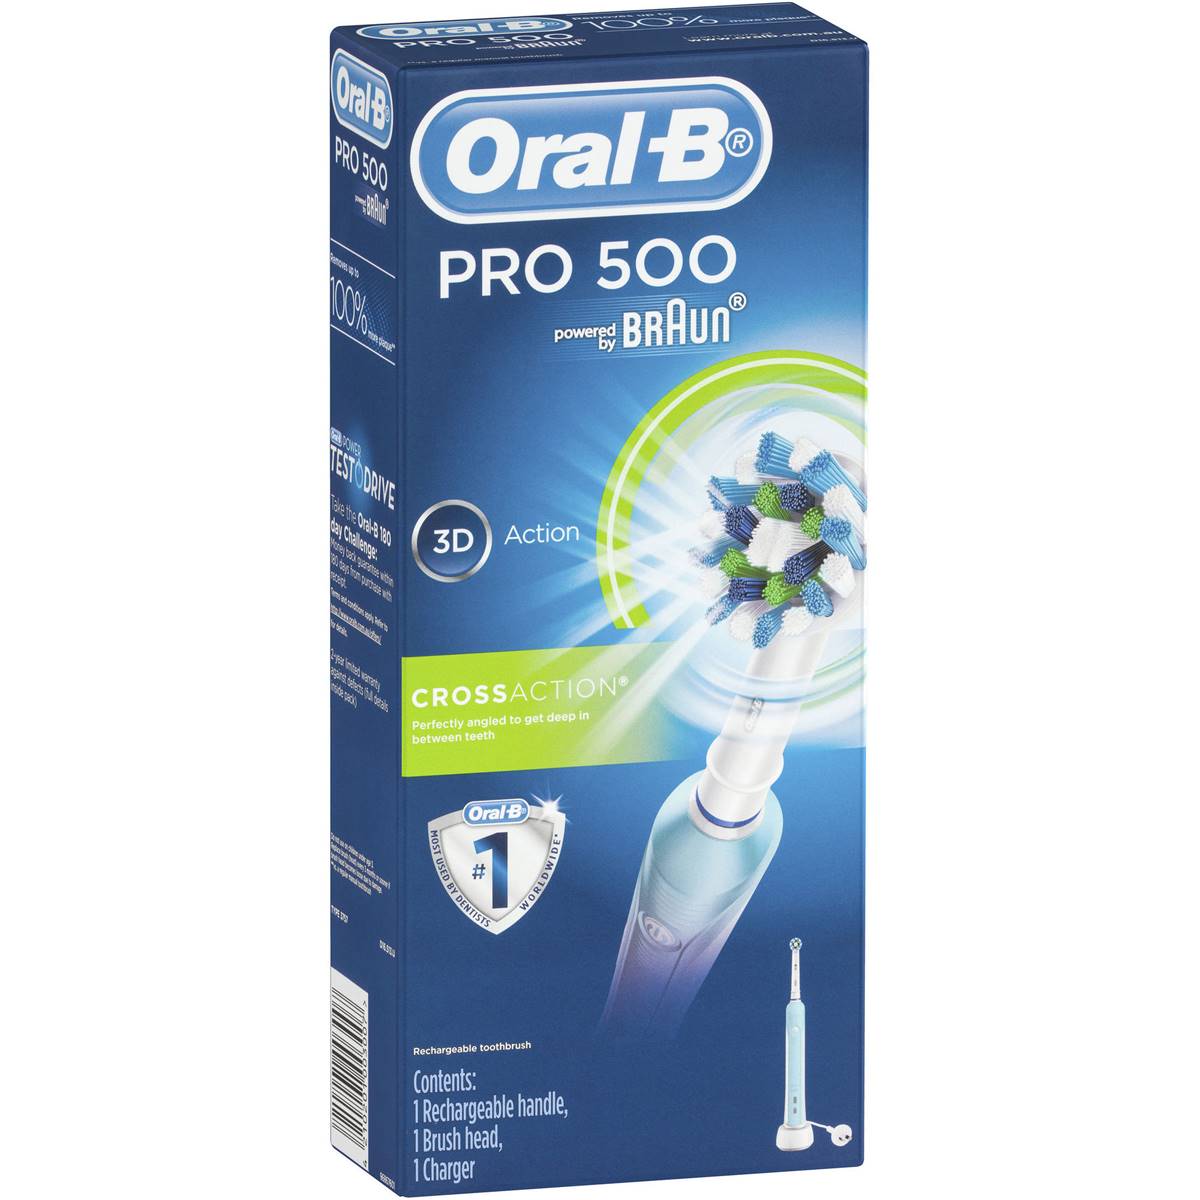 Oral B Professional Care Powered Toothbrush 500